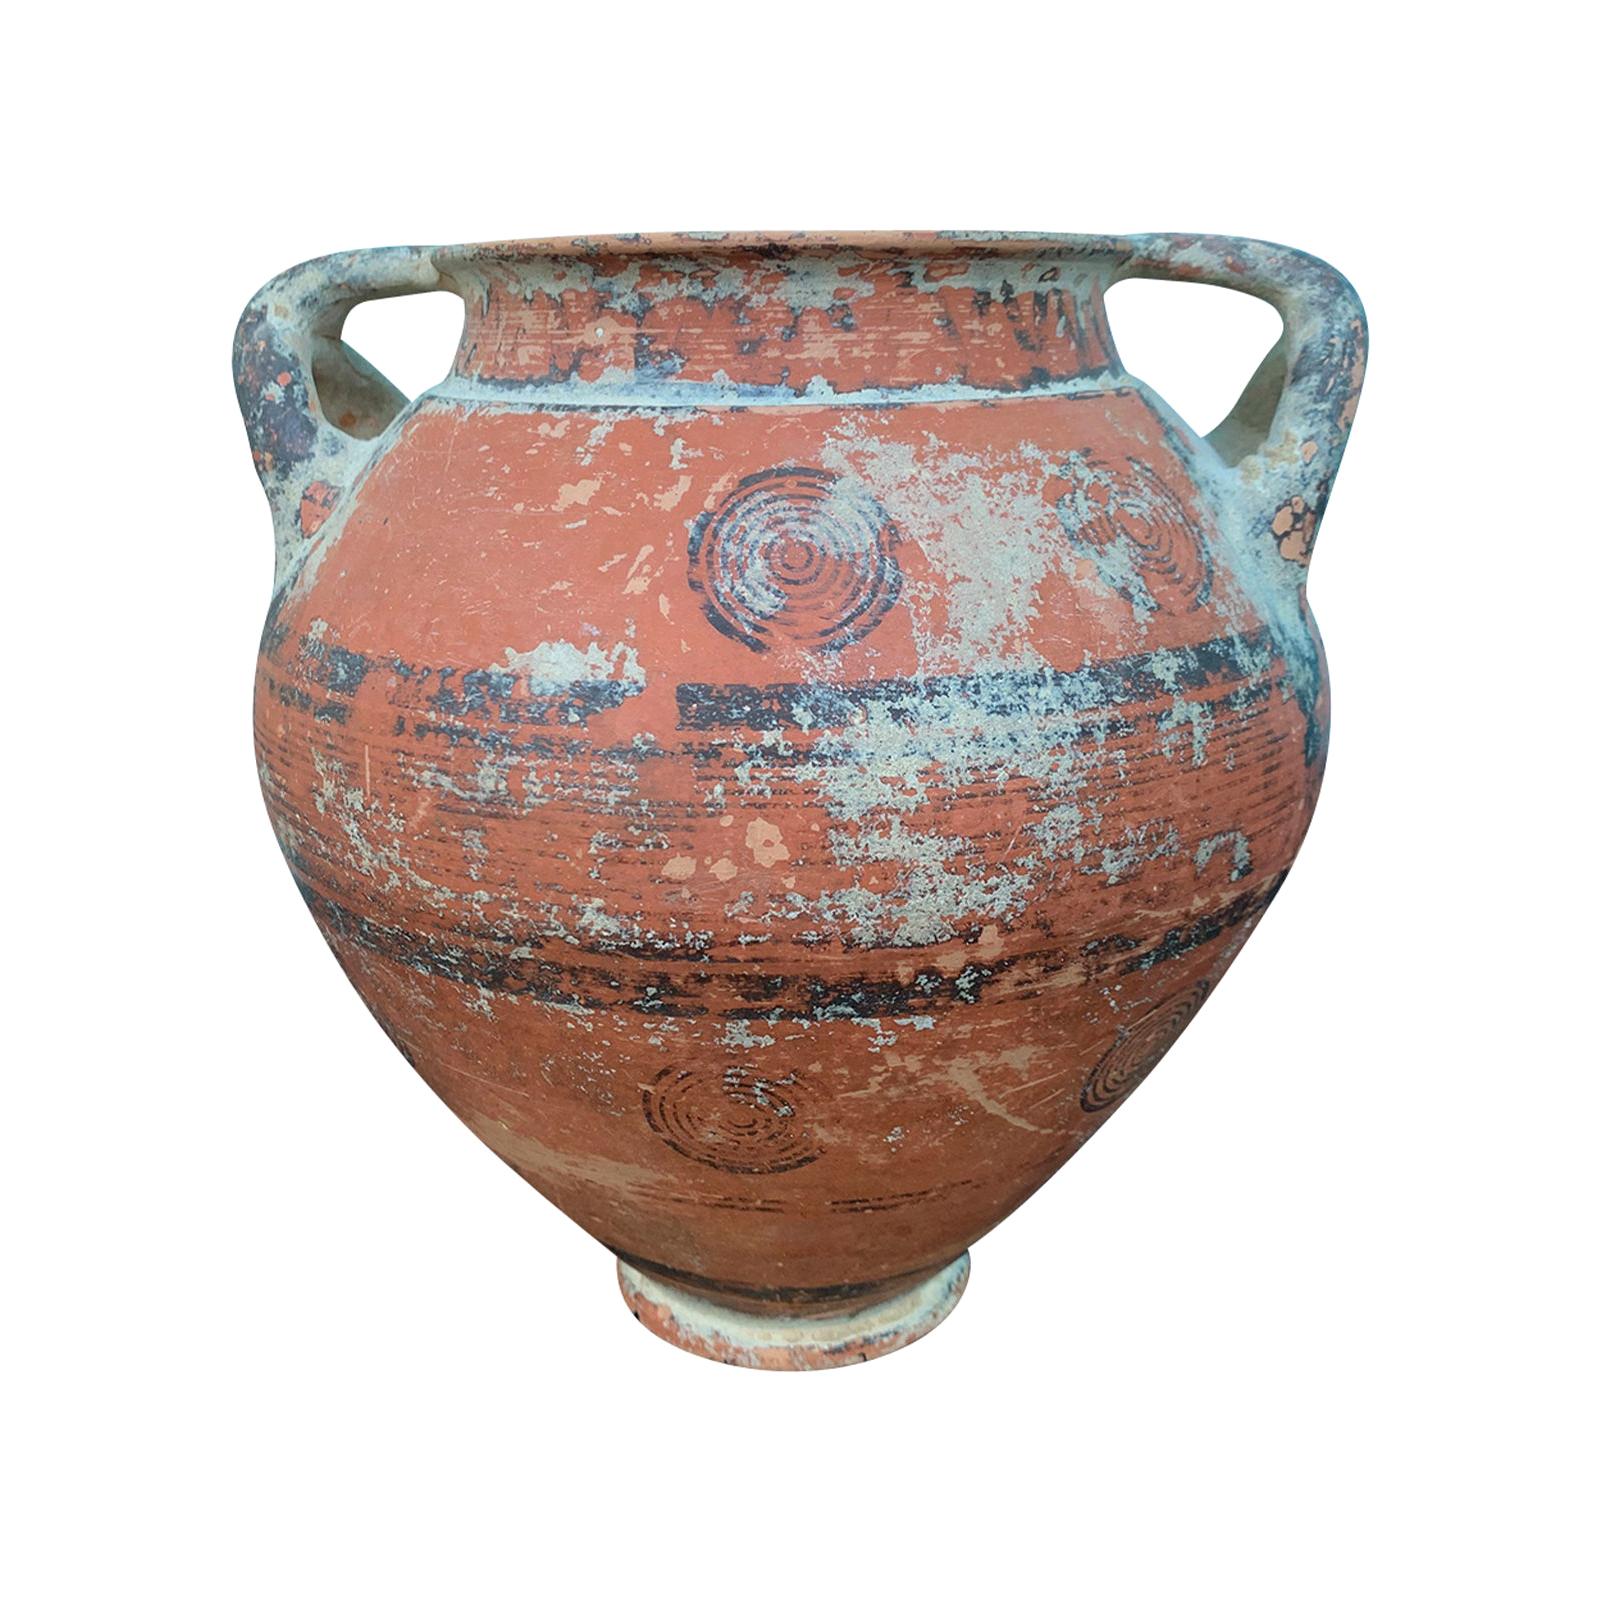 17th Century or Earlier Cypriot Phoenician Terracotta Jar with Bull's Eyes